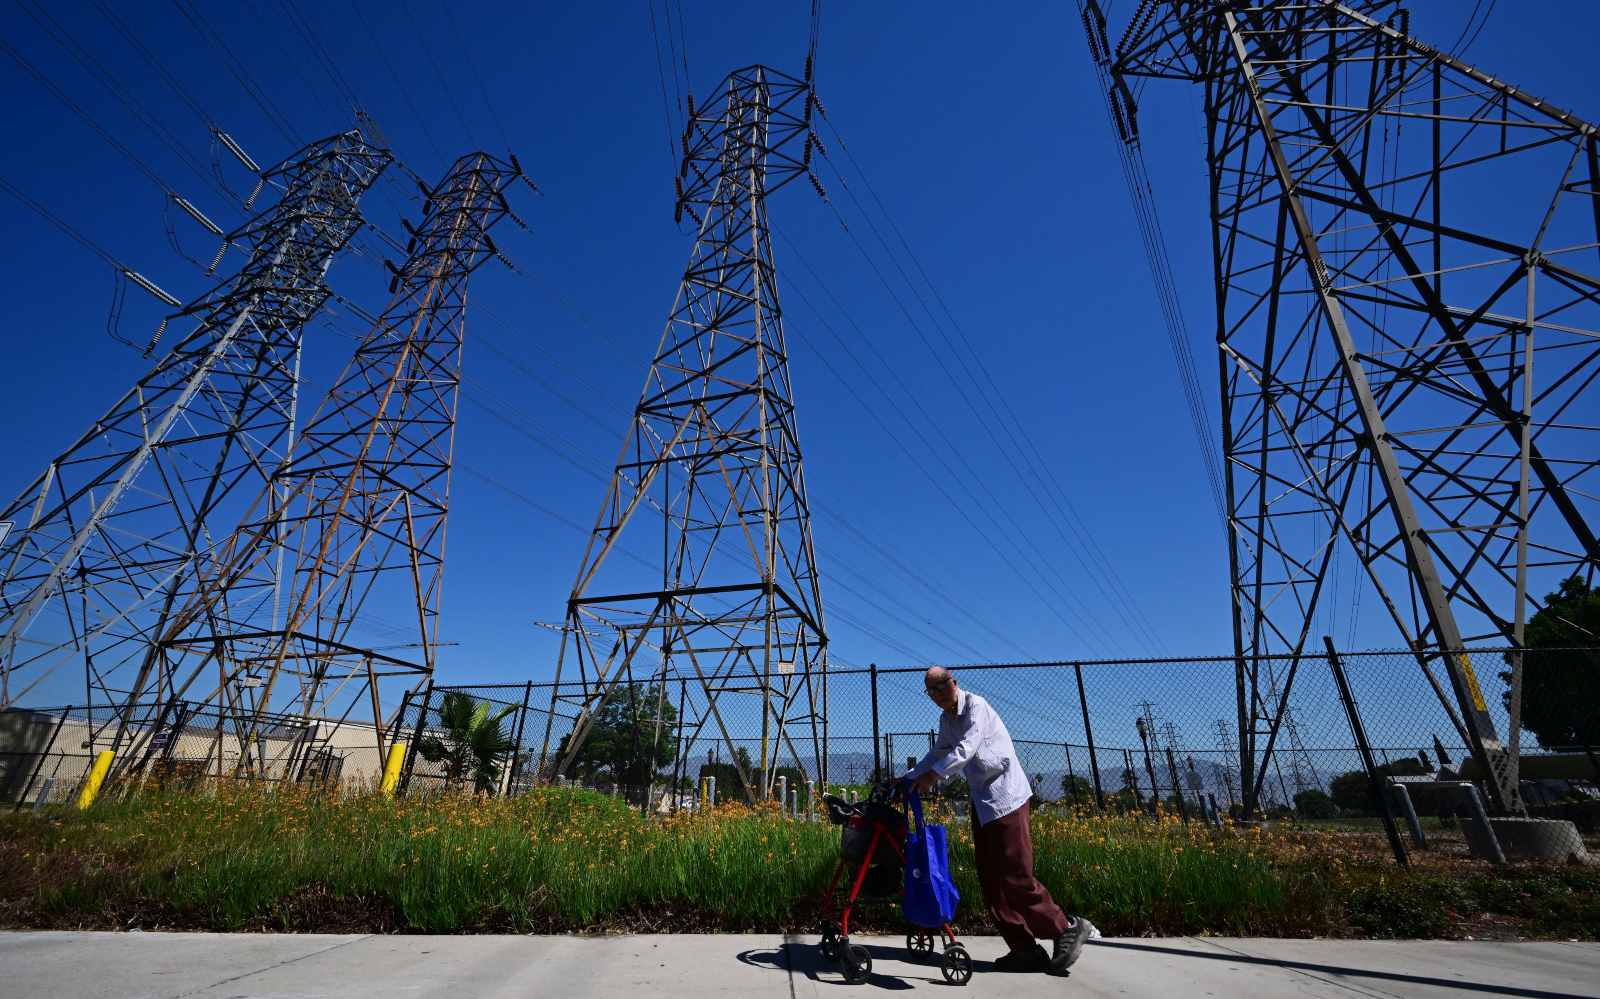 An elderly man with a walker stands in front of large power line on a sunny, clear skies day.